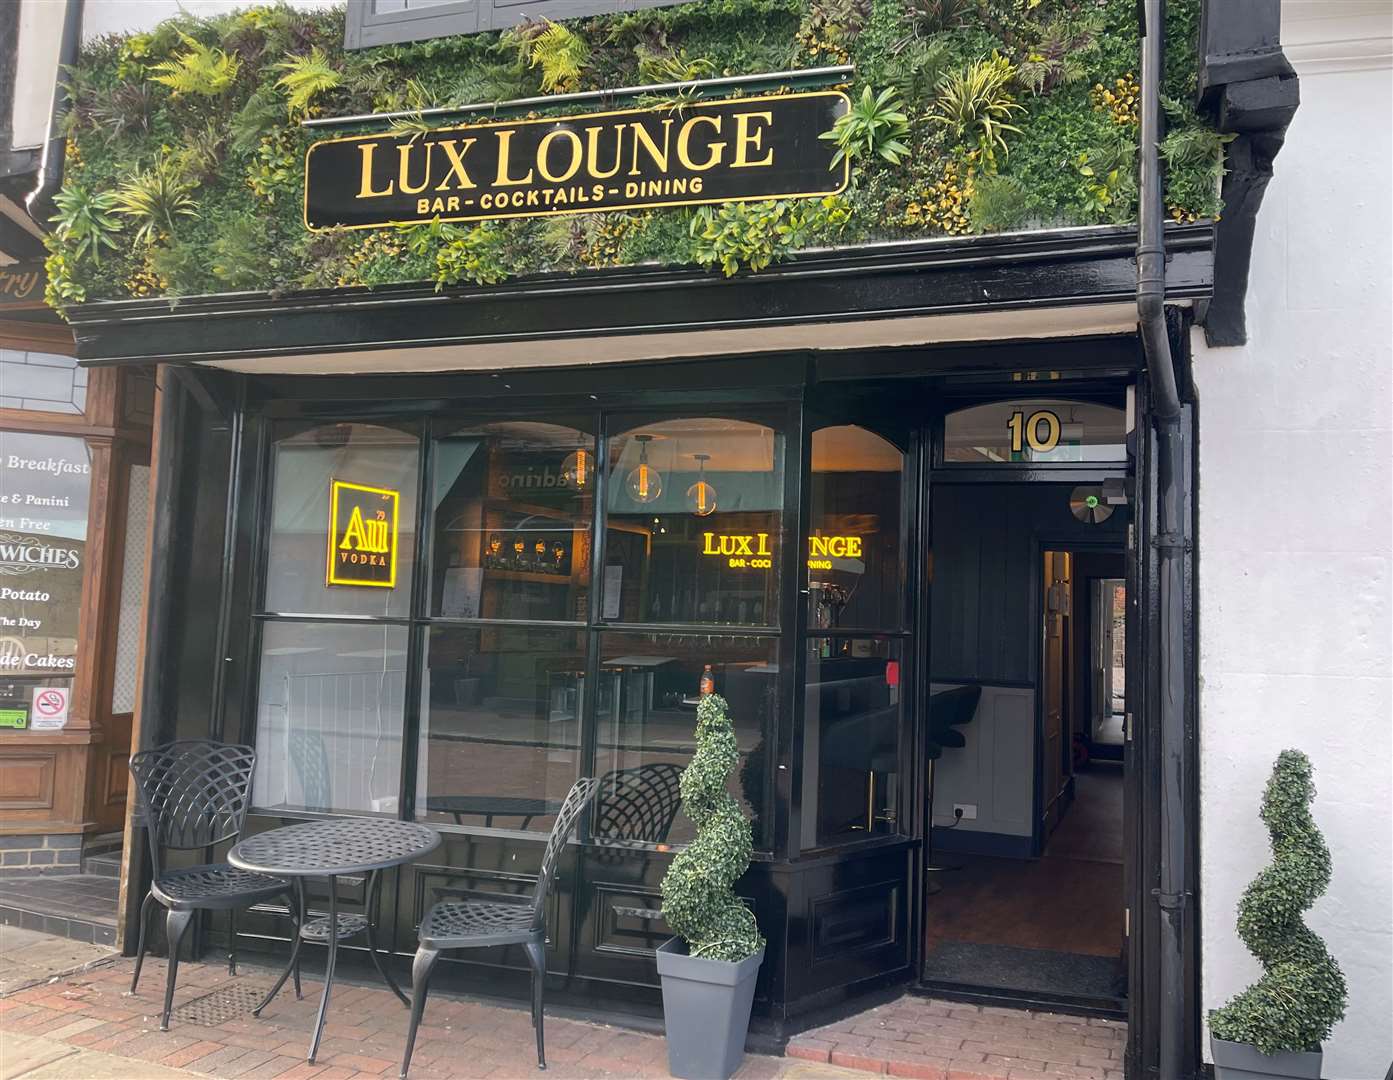 Lux Lounge – a new cocktail bar in Rochester